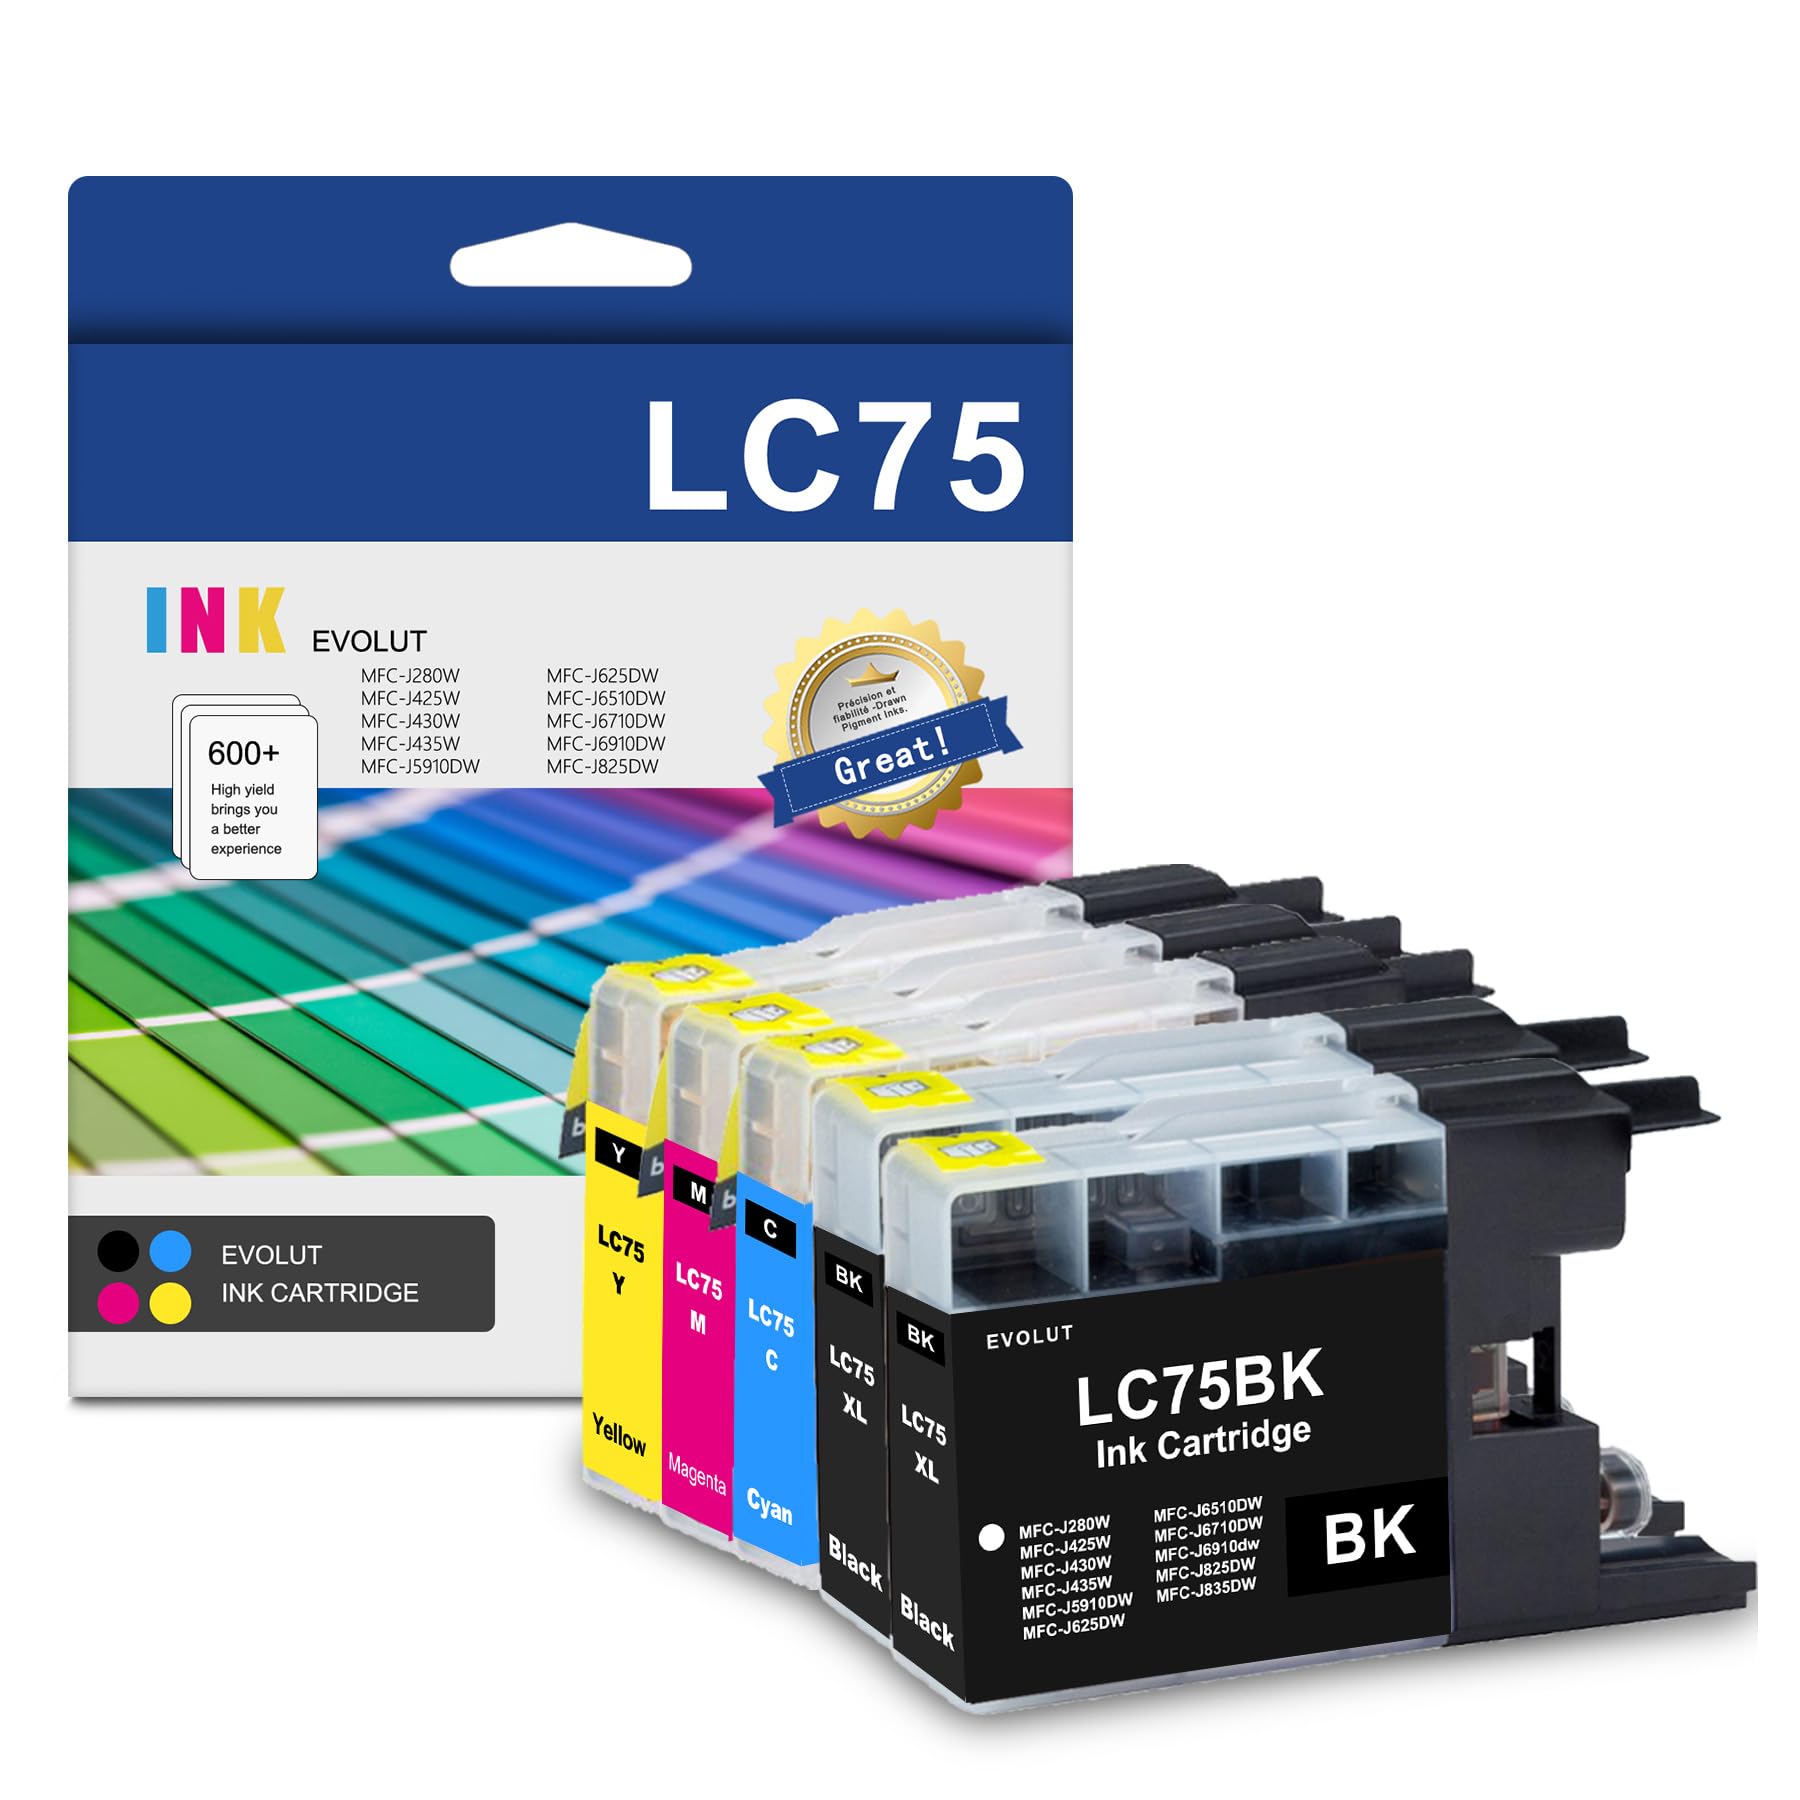 11 Amazing Brother Mfc-J430W Printer Ink Cartridges for 2023